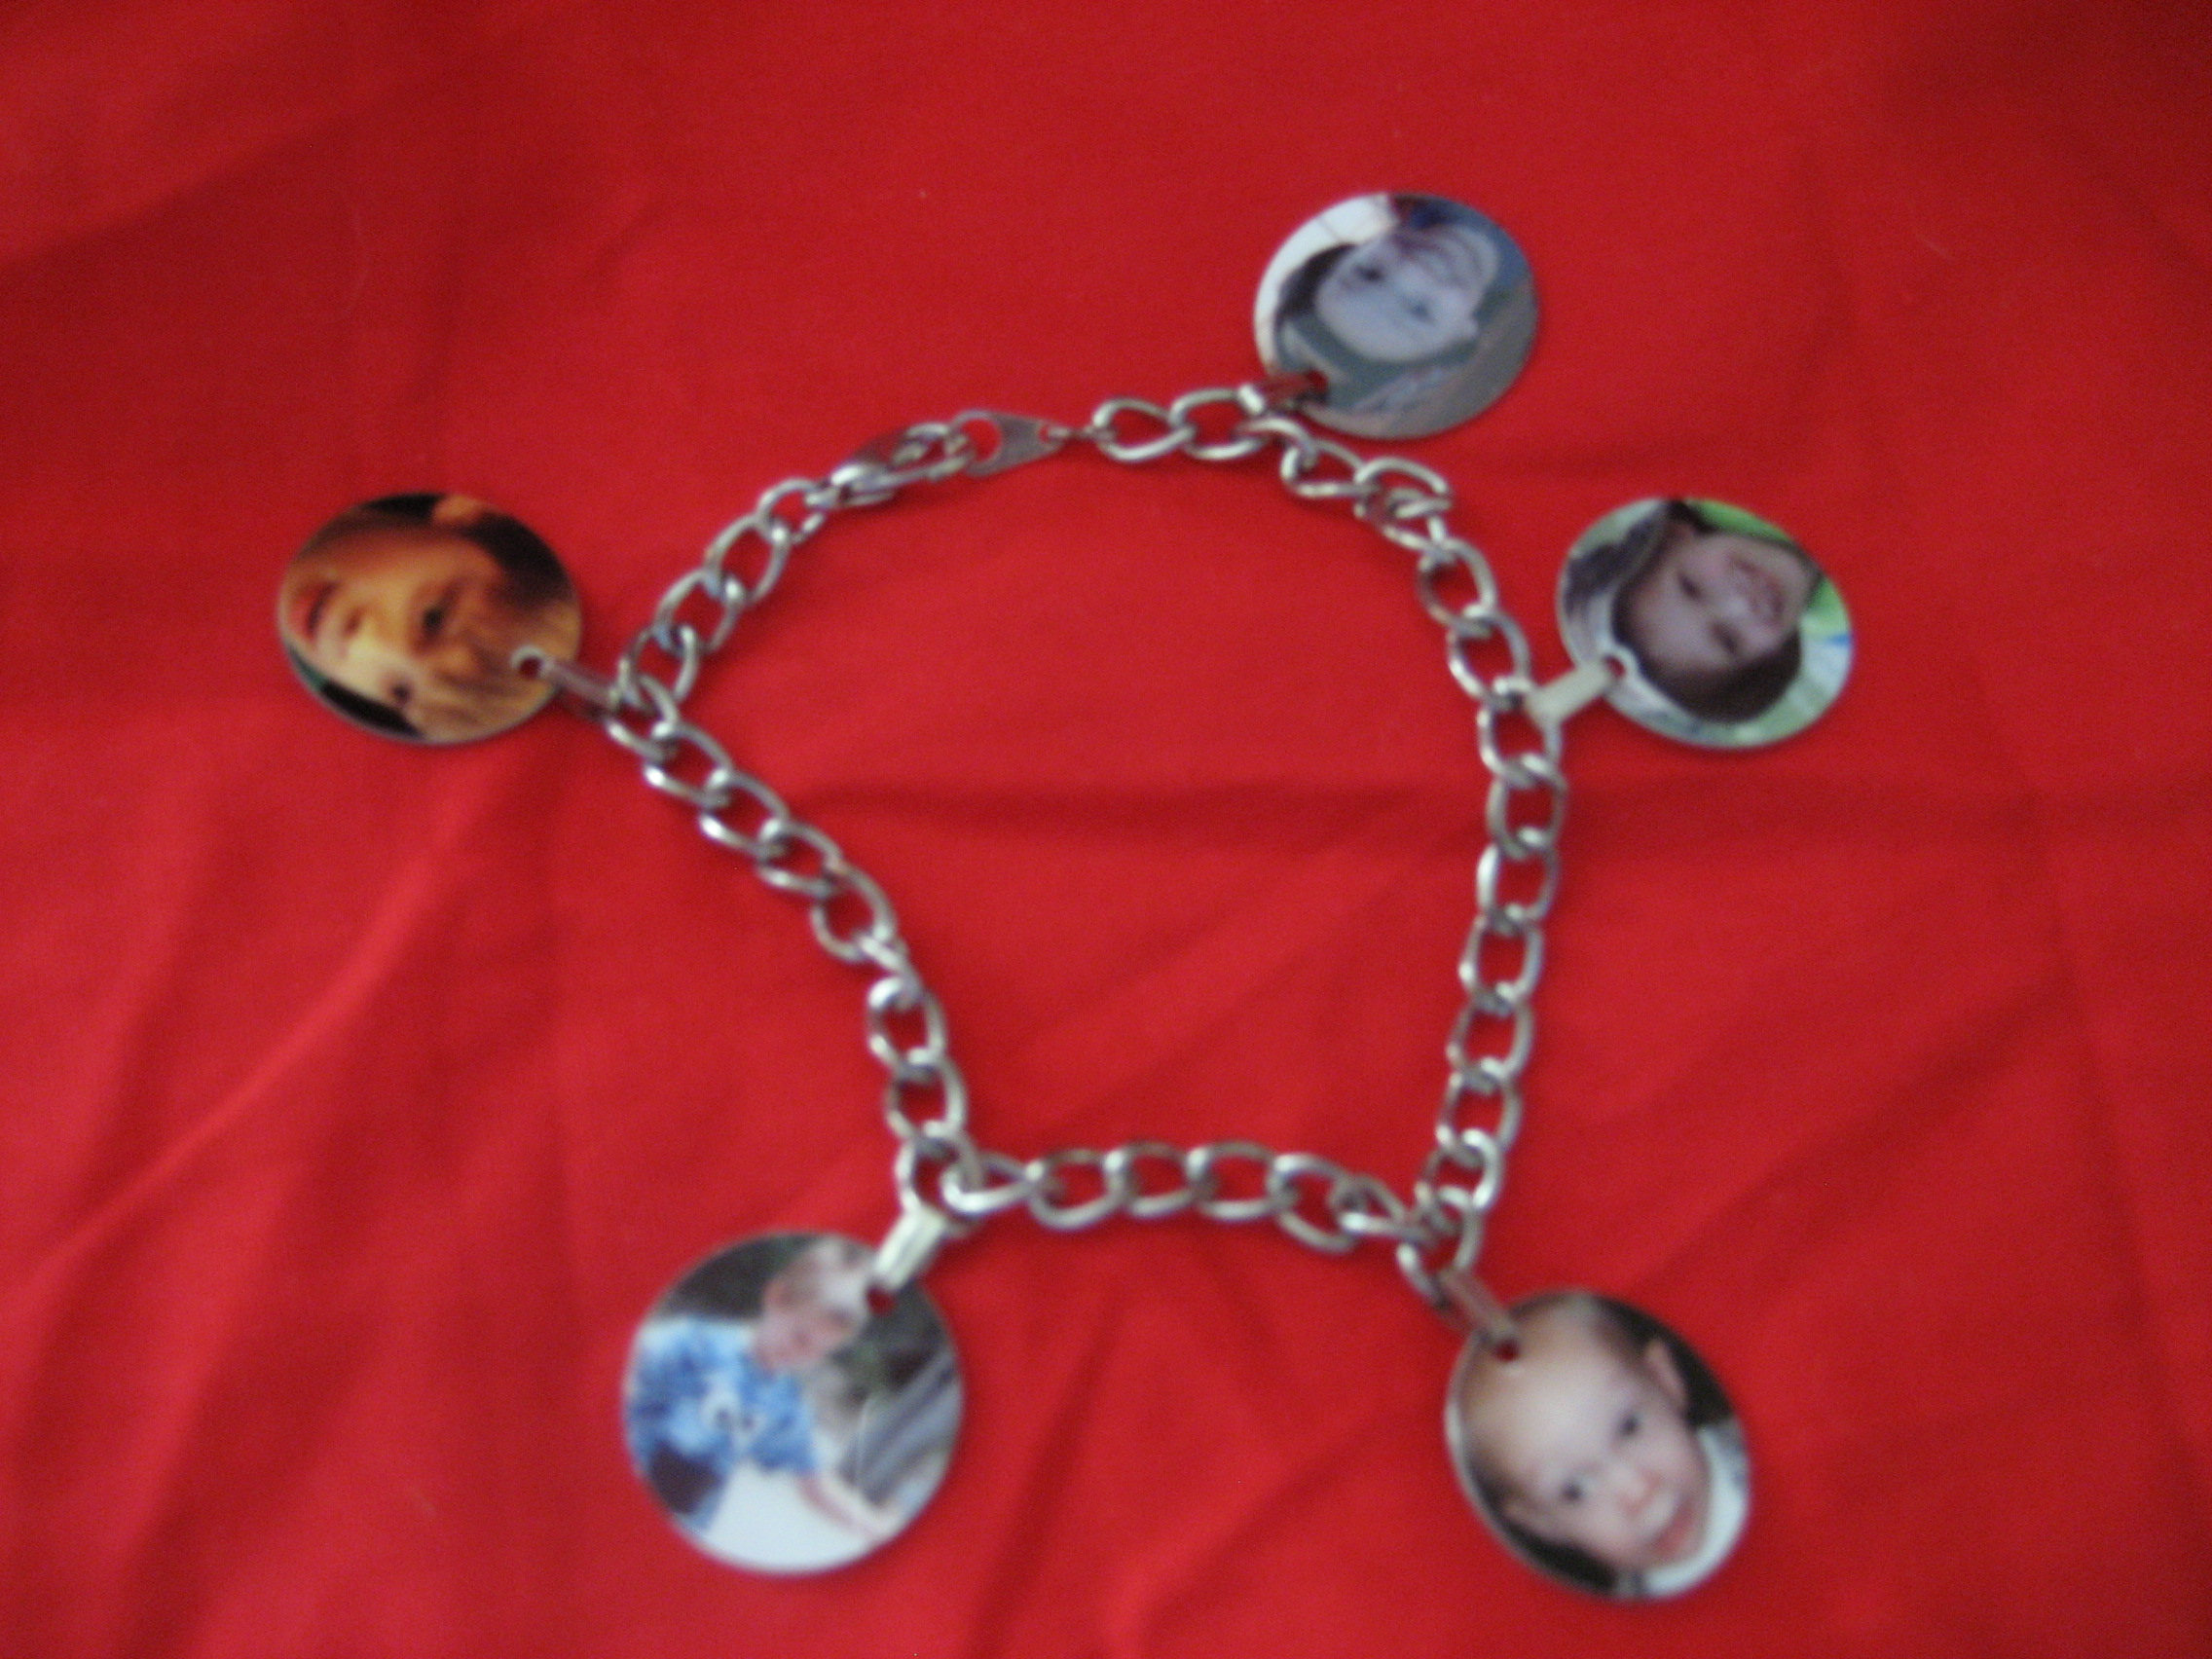 Charm Bracelet made with sublimation printing